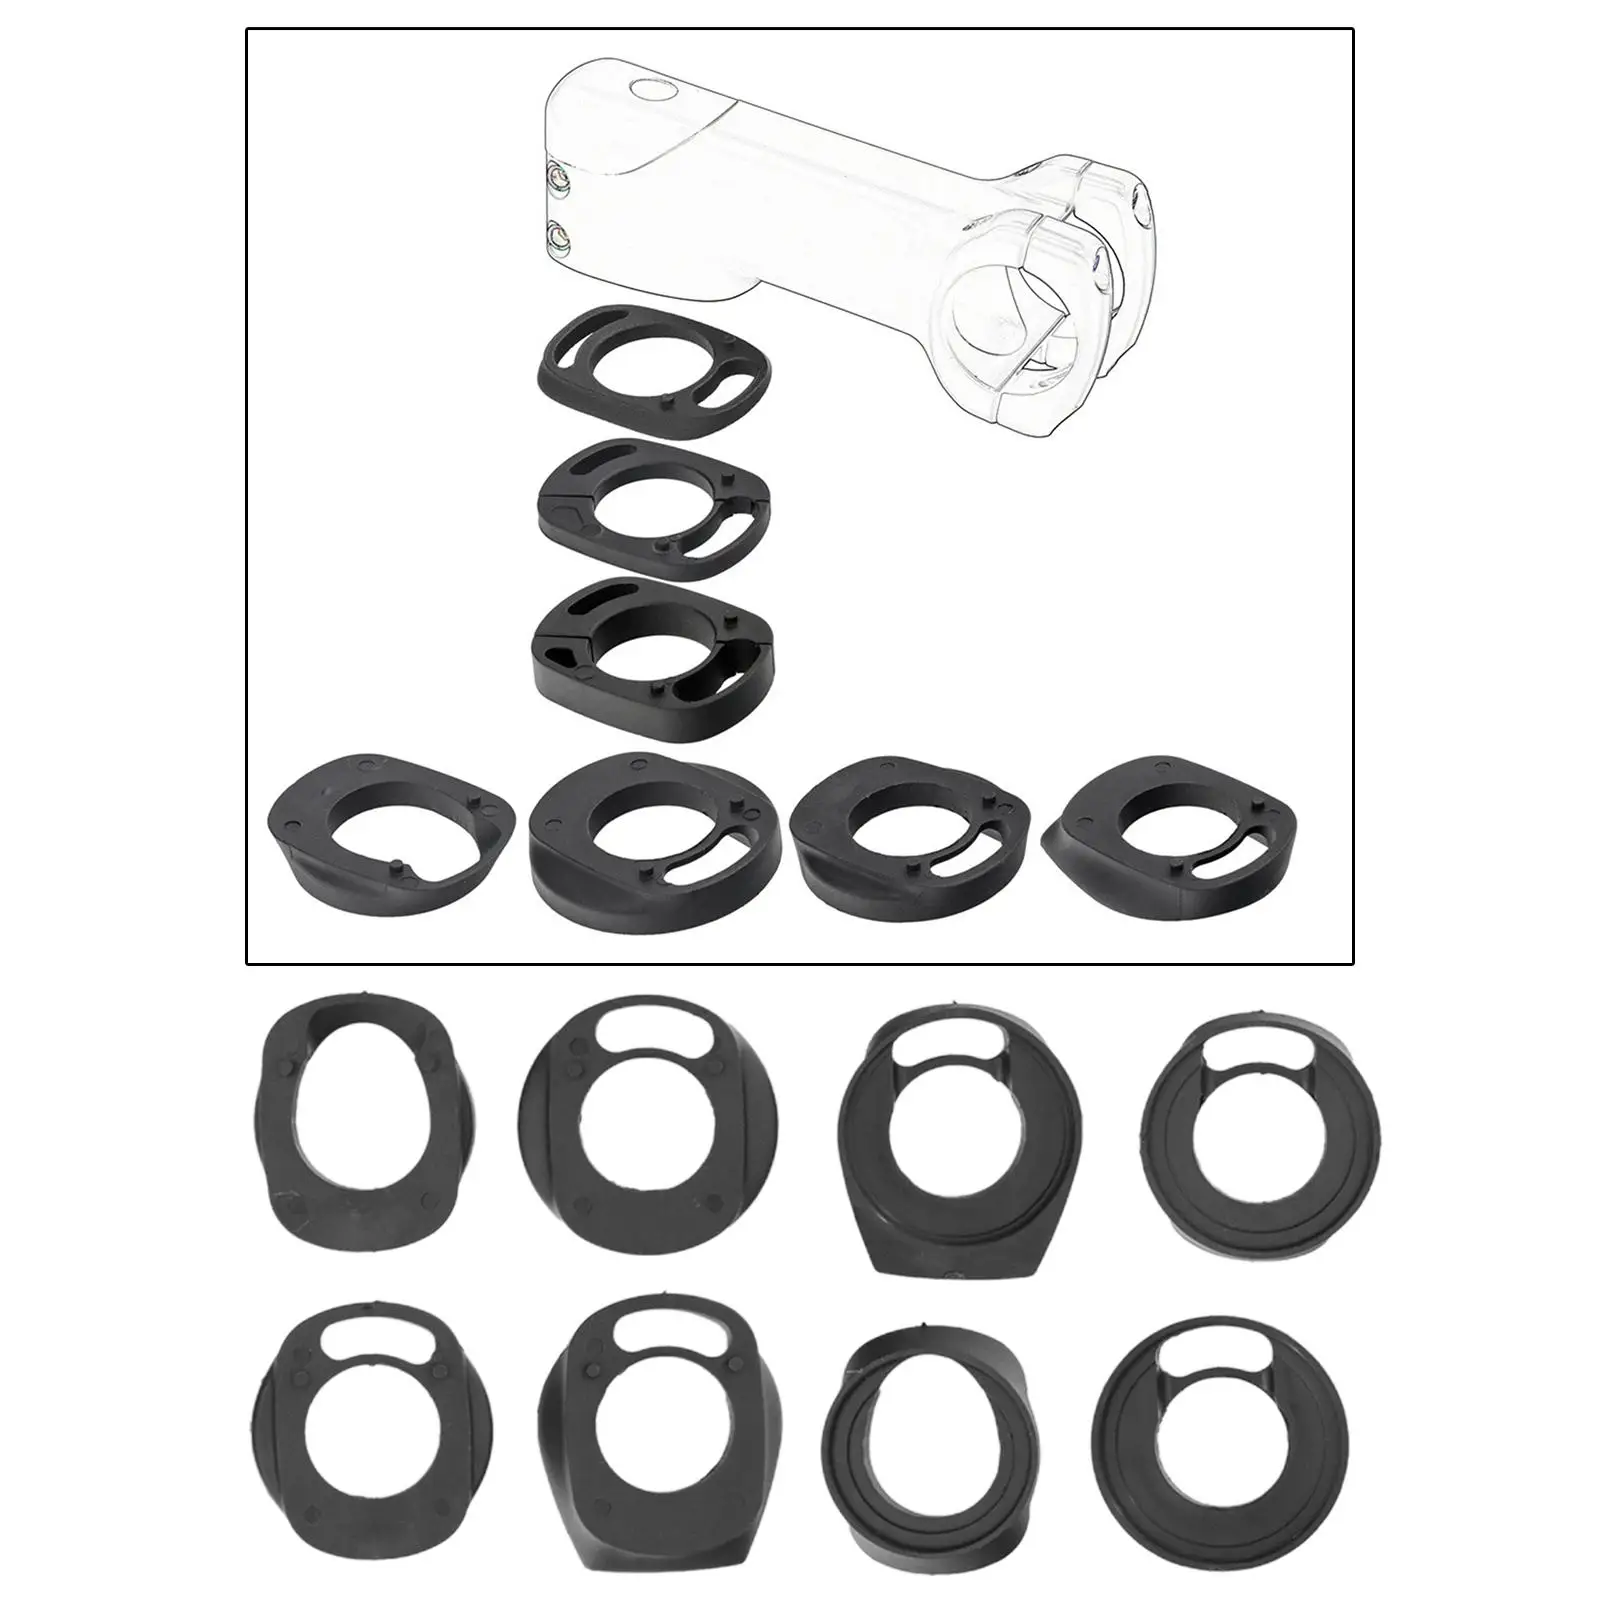 8x Bike Curved Handlebar Spacer Headset Tools Raise up Accessories Set Parts for